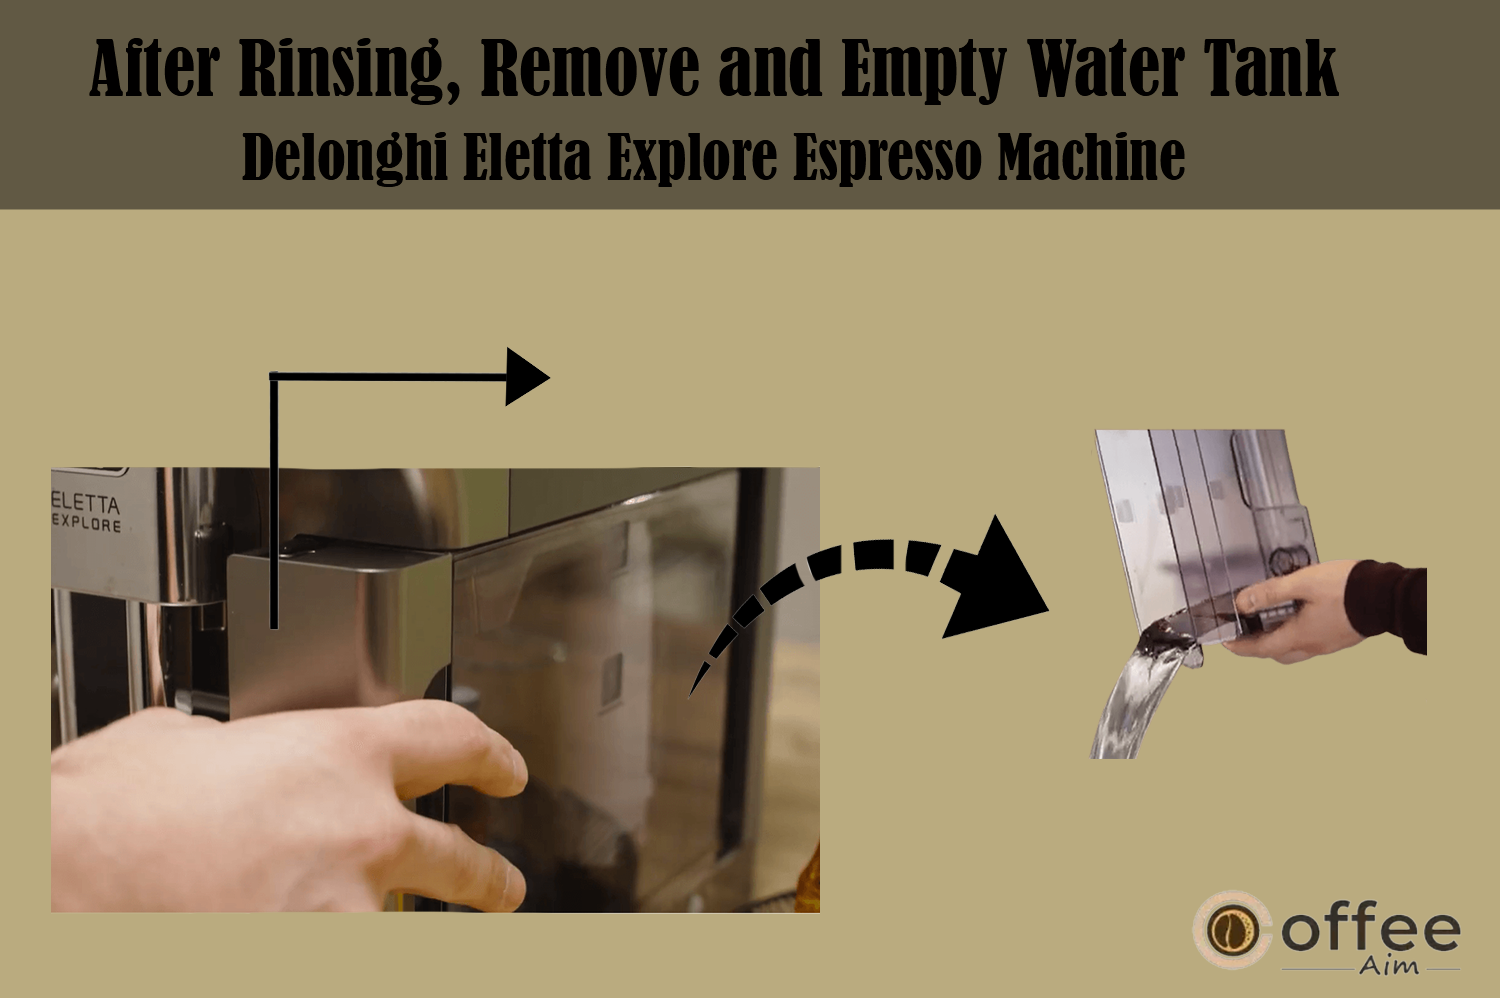 This image illustrates the step of removing and emptying the water tank of the De'Longhi Eletta Explore Espresso Machine after the rinsing process, as explained in the article 'How to Use the De'Longhi Eletta Explore Espresso Machine'.